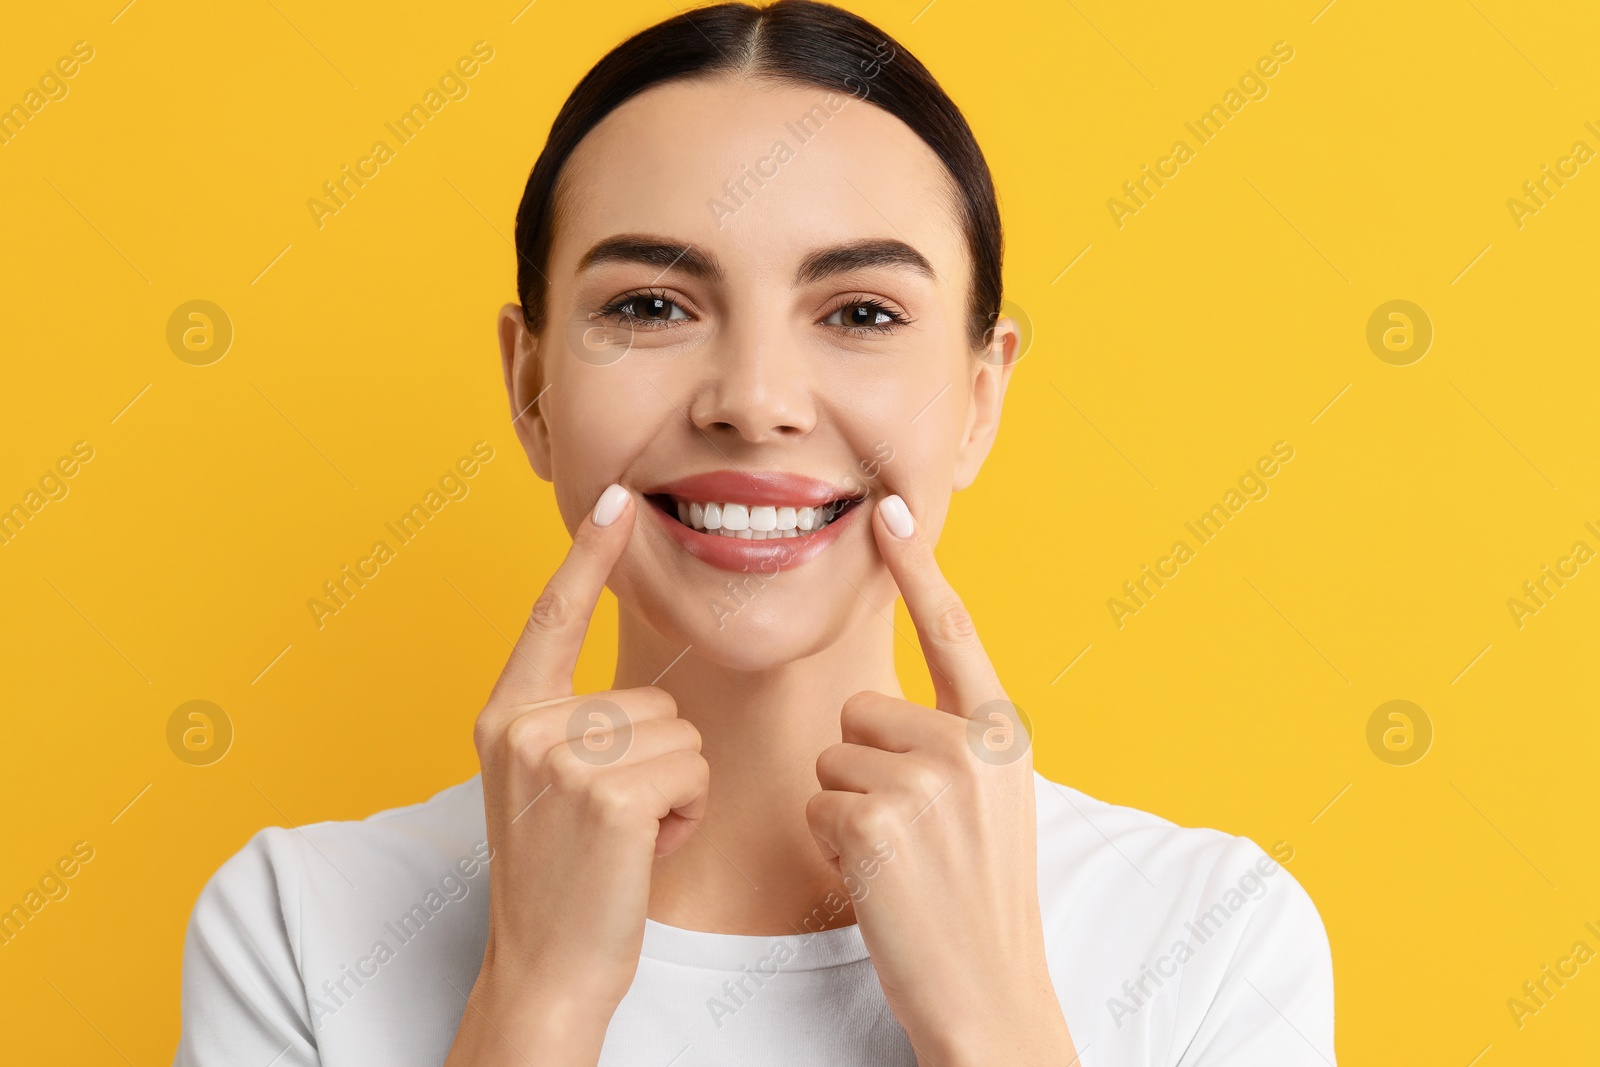 Photo of Beautiful woman showing her clean teeth and smiling on yellow background